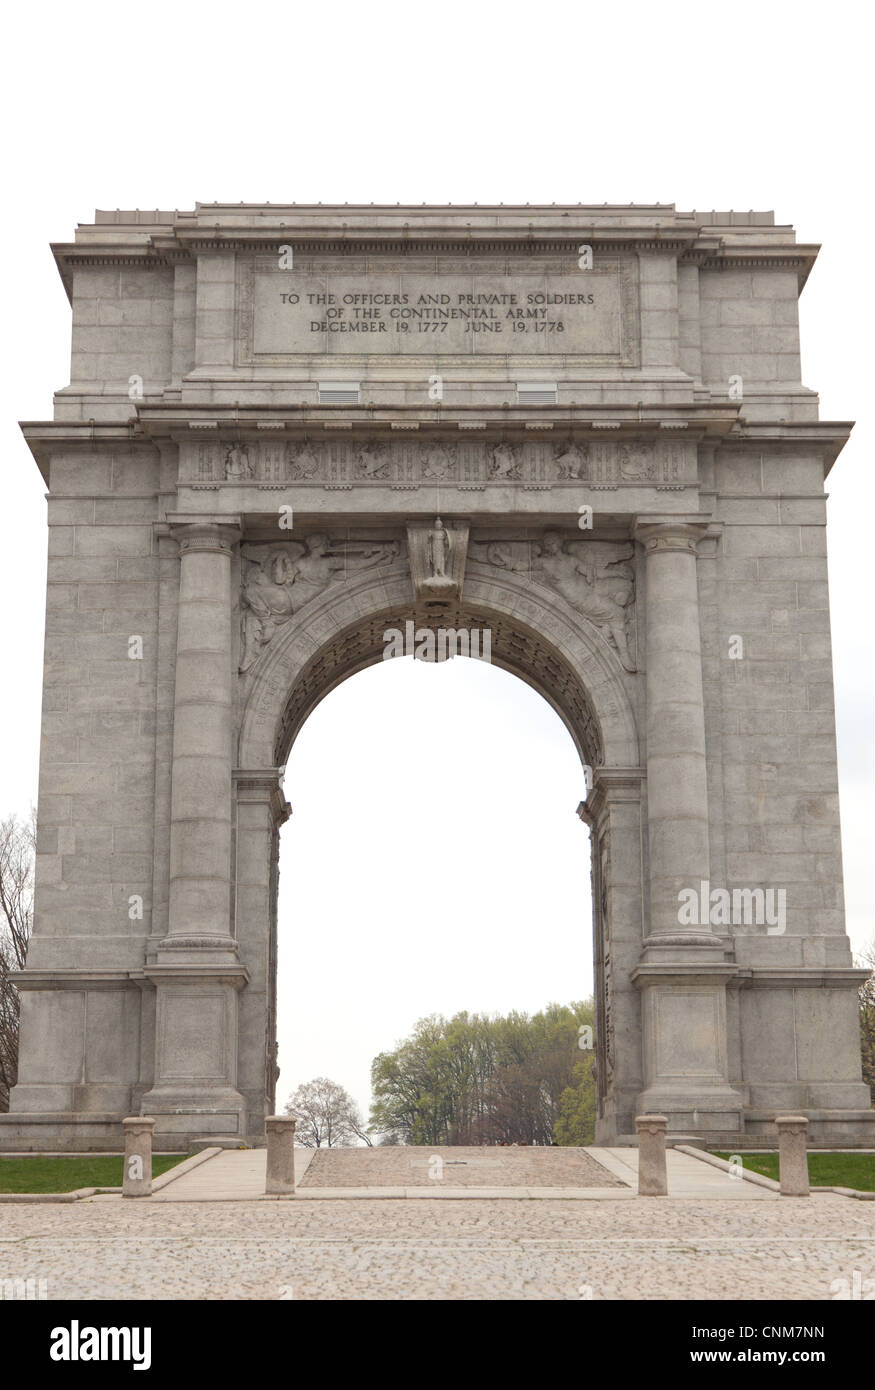 Das National Memorial Arch im Valley Forge National Park in Pennsylvania Stockfoto